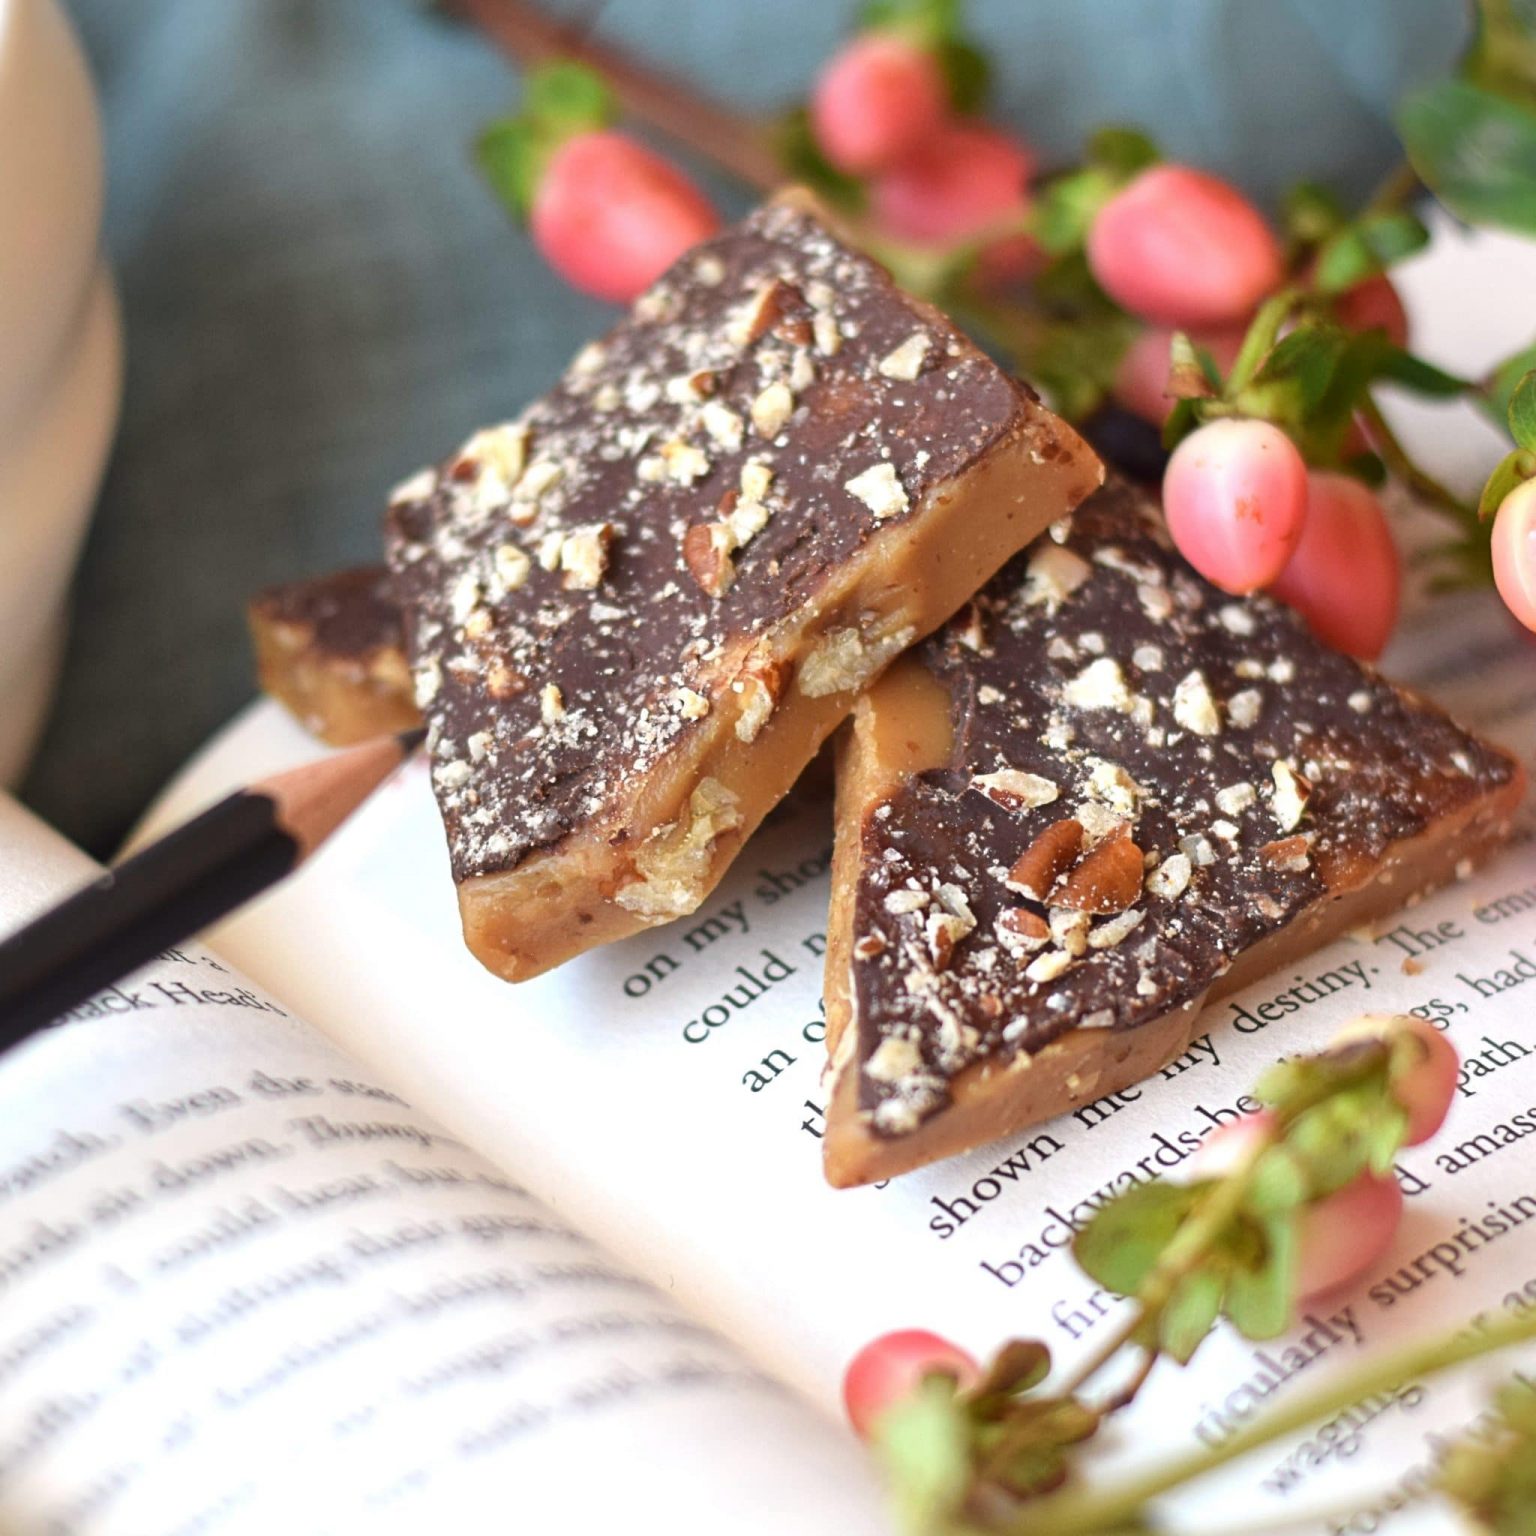 English Toffee with Pecans